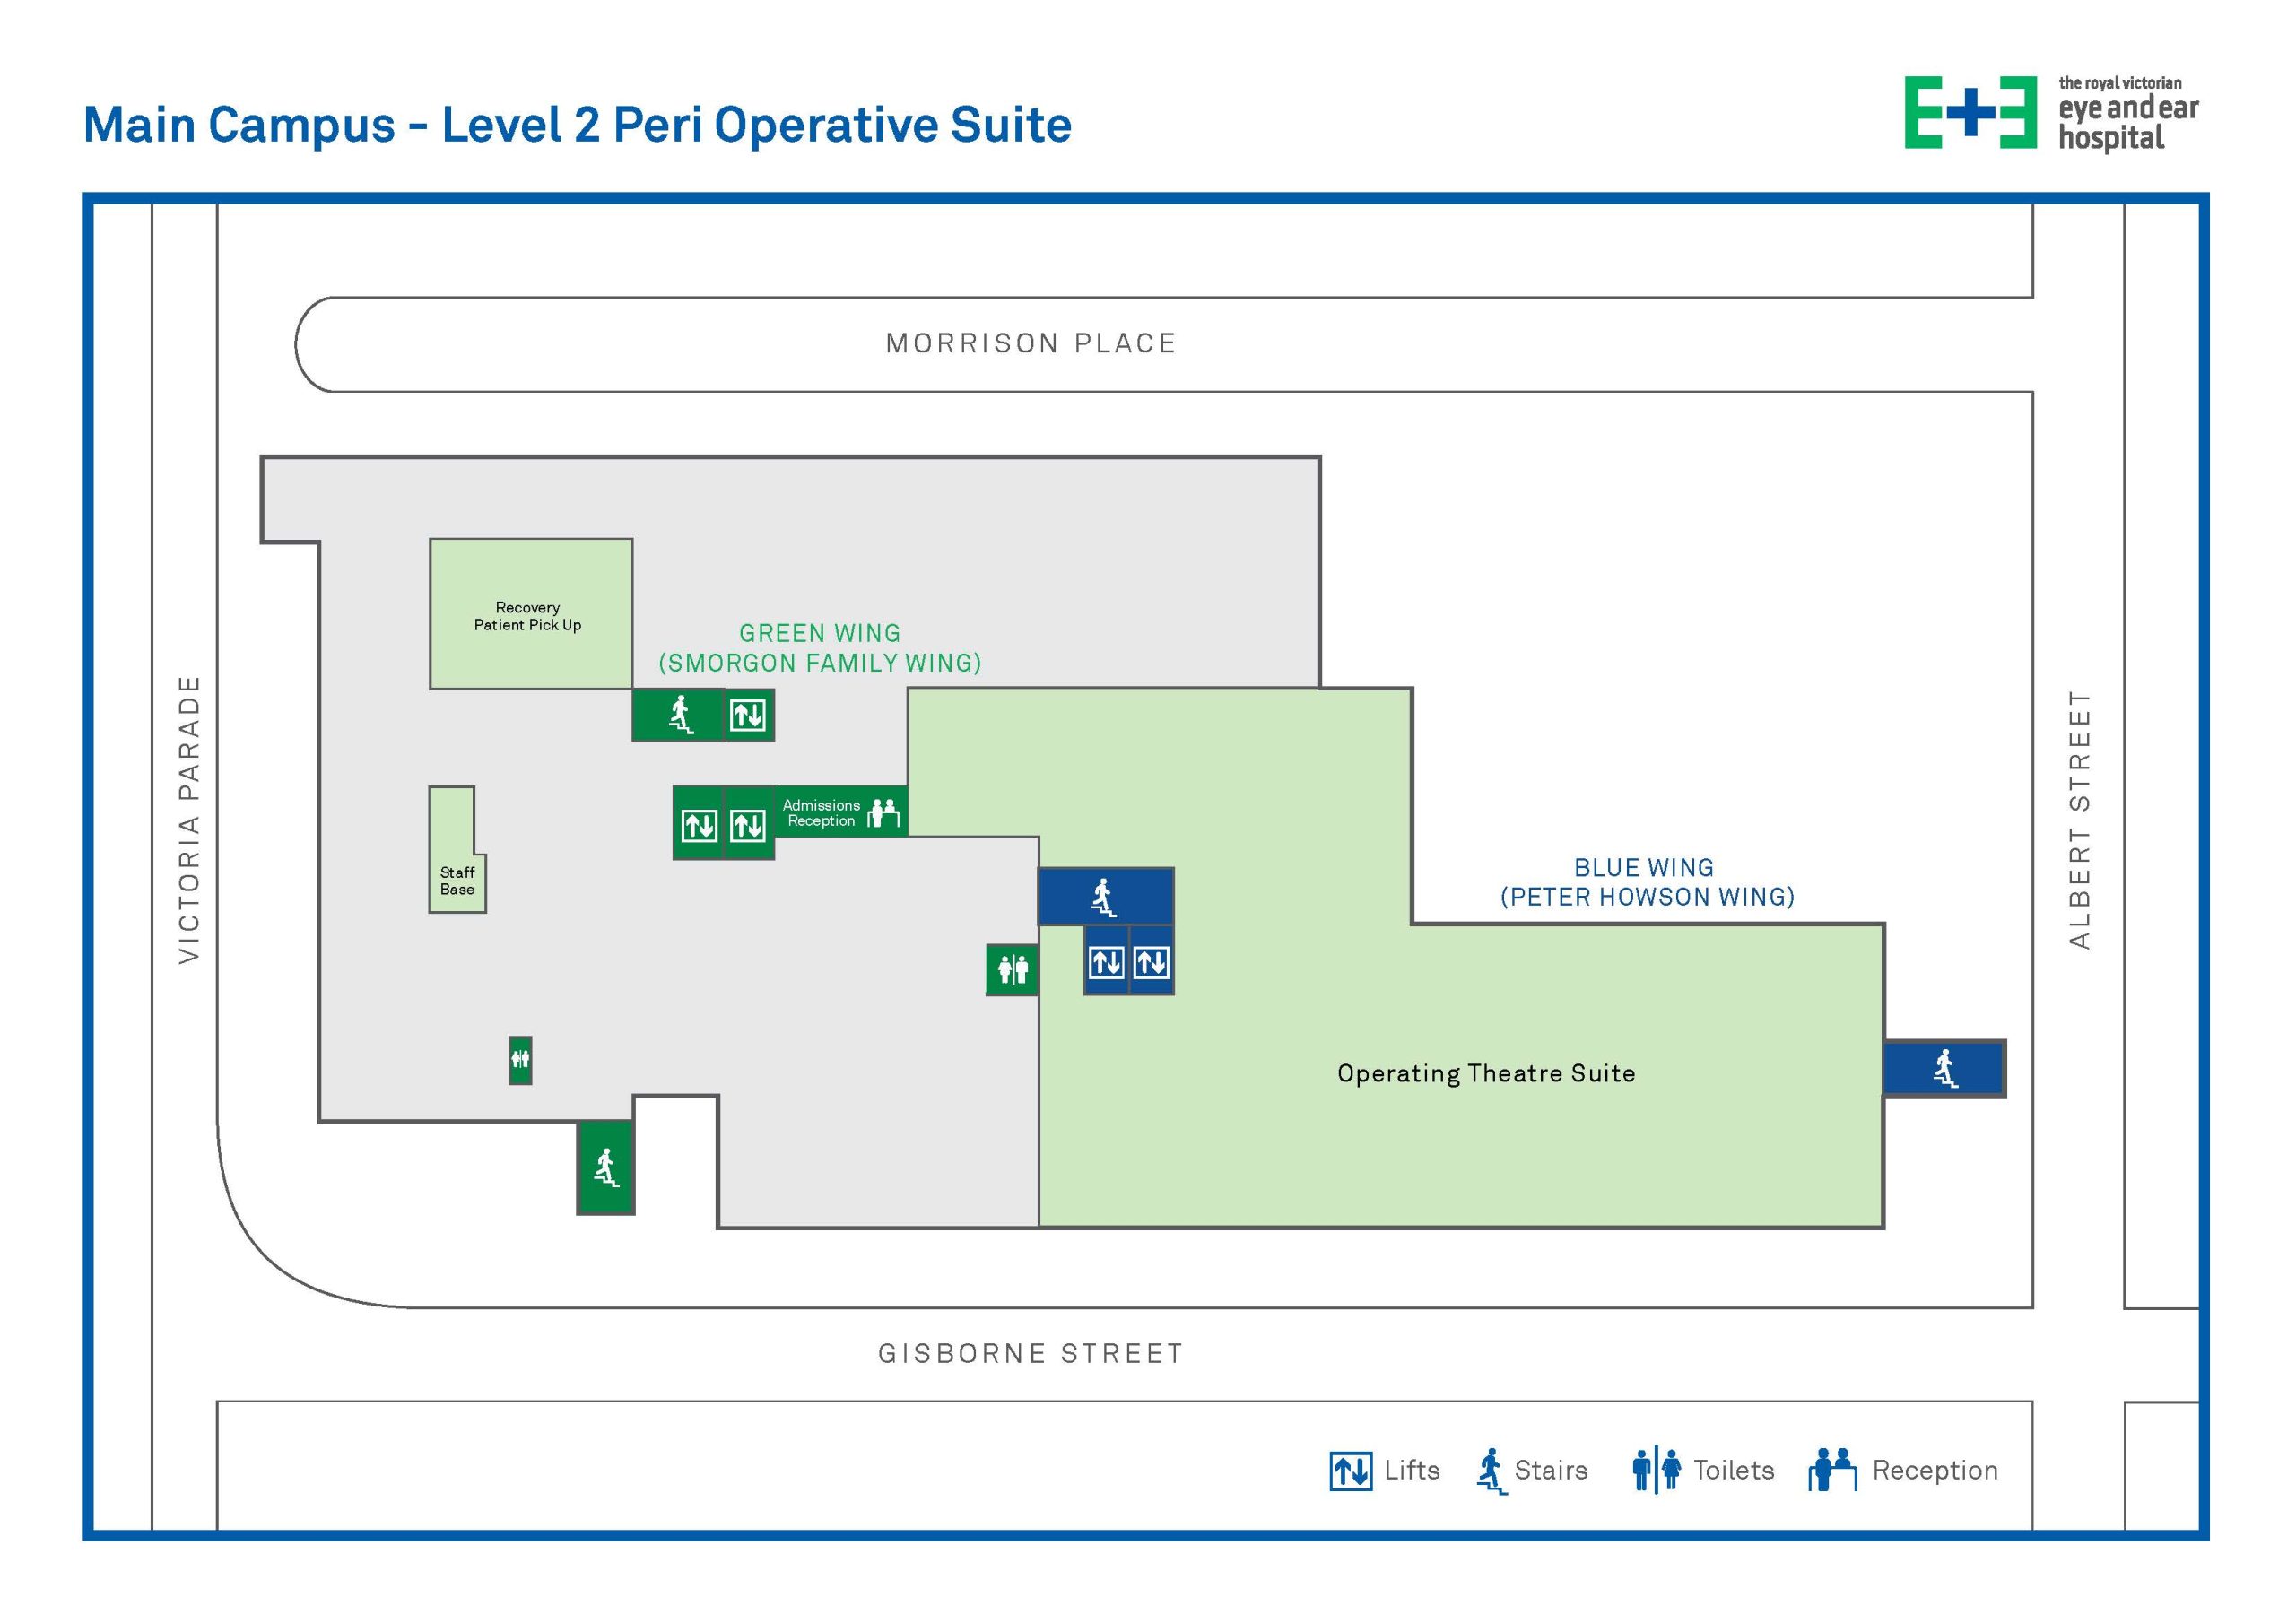 Simplified map of level 2 of the hospital.